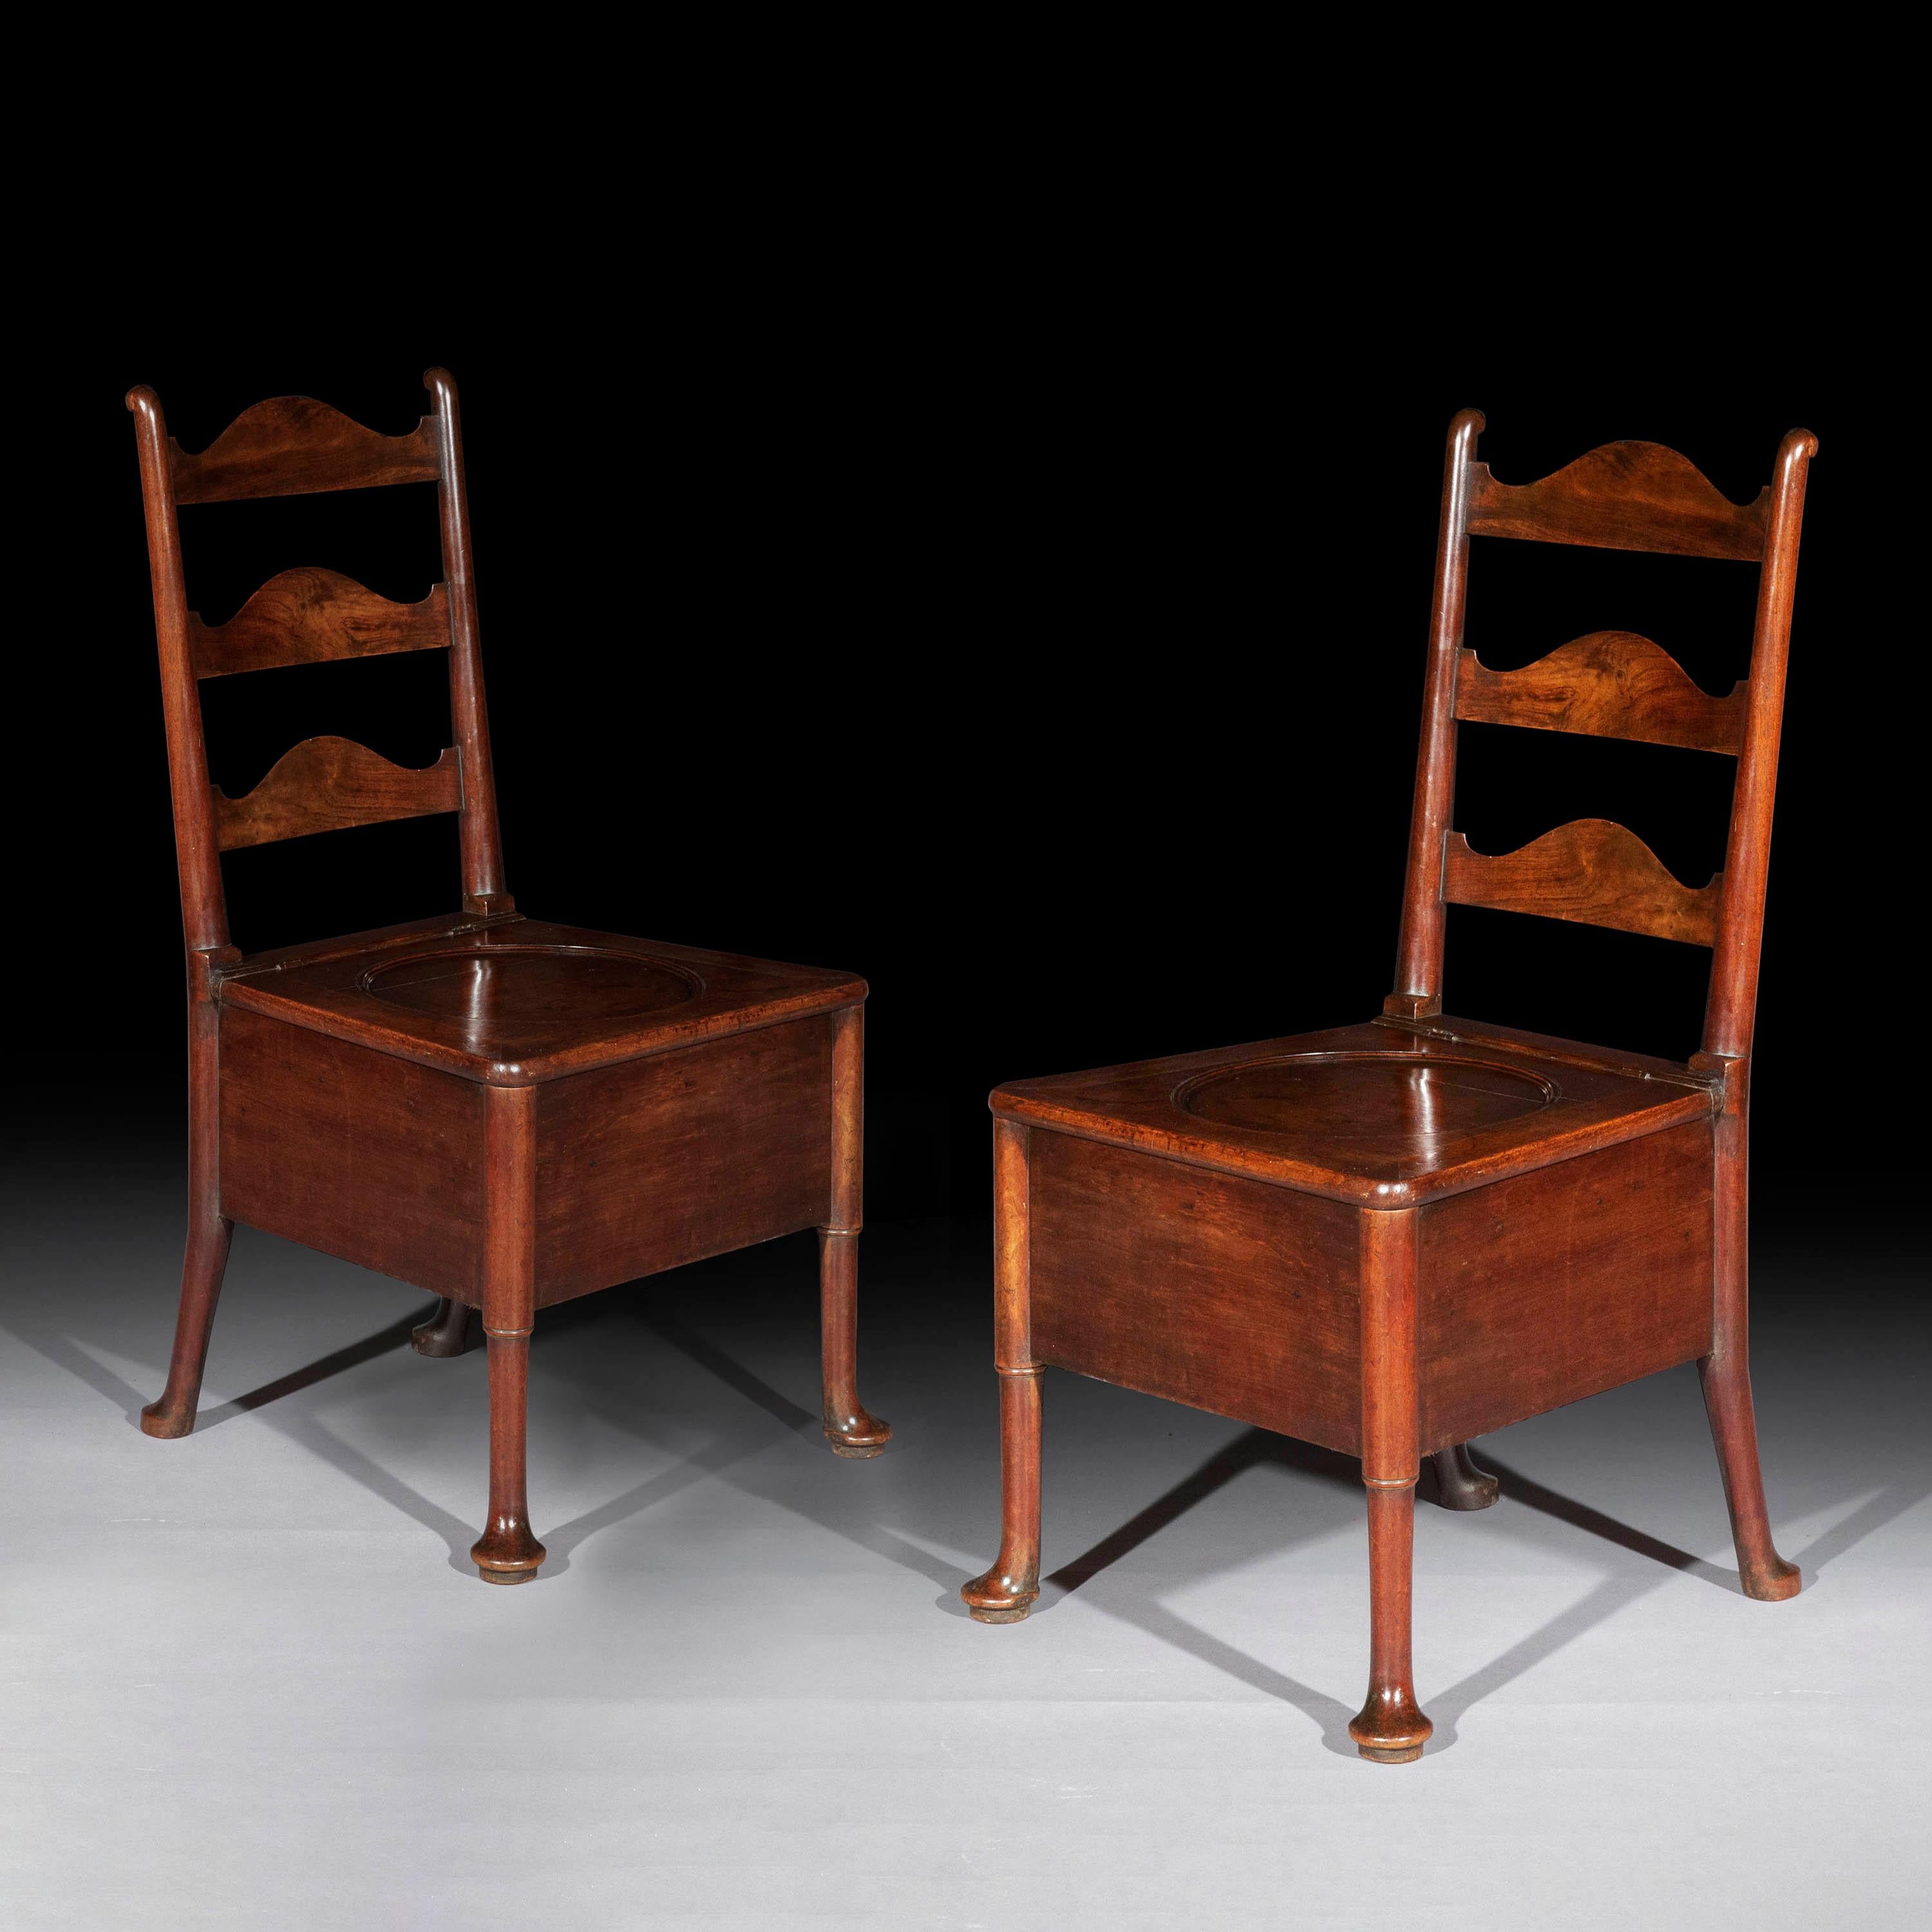 A pair of unusual early Georgian period walnut hall chairs of 'ladderback' design, 
English, circa 1740.

Why we like it
A very rare example of vernacular design to be so superbly crafted. We love an incredibly graphic, minimalist design of these